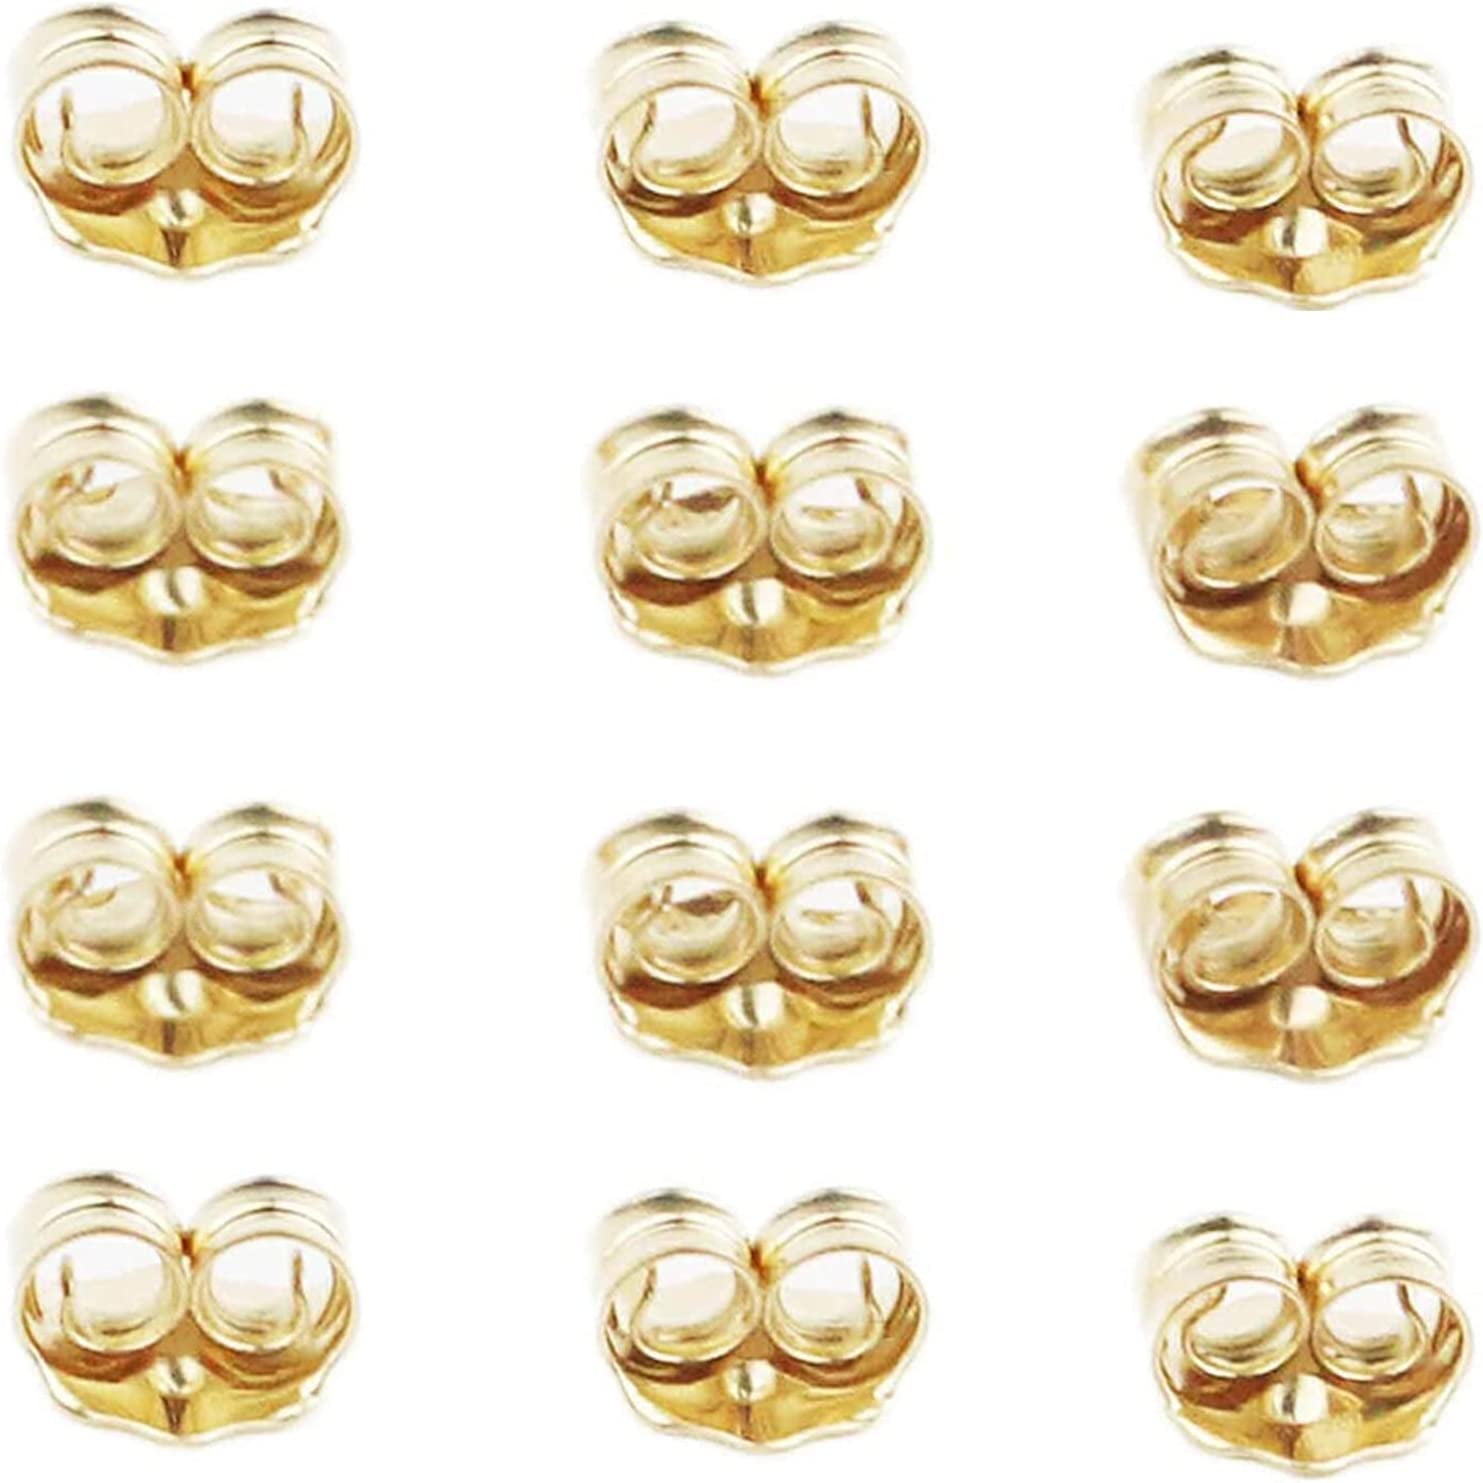 14k Yellow Gold and Silicone Earring Backs, 5 X 3.6 Mm, Replacement Earring  Backs, Comfort Earring Backs 